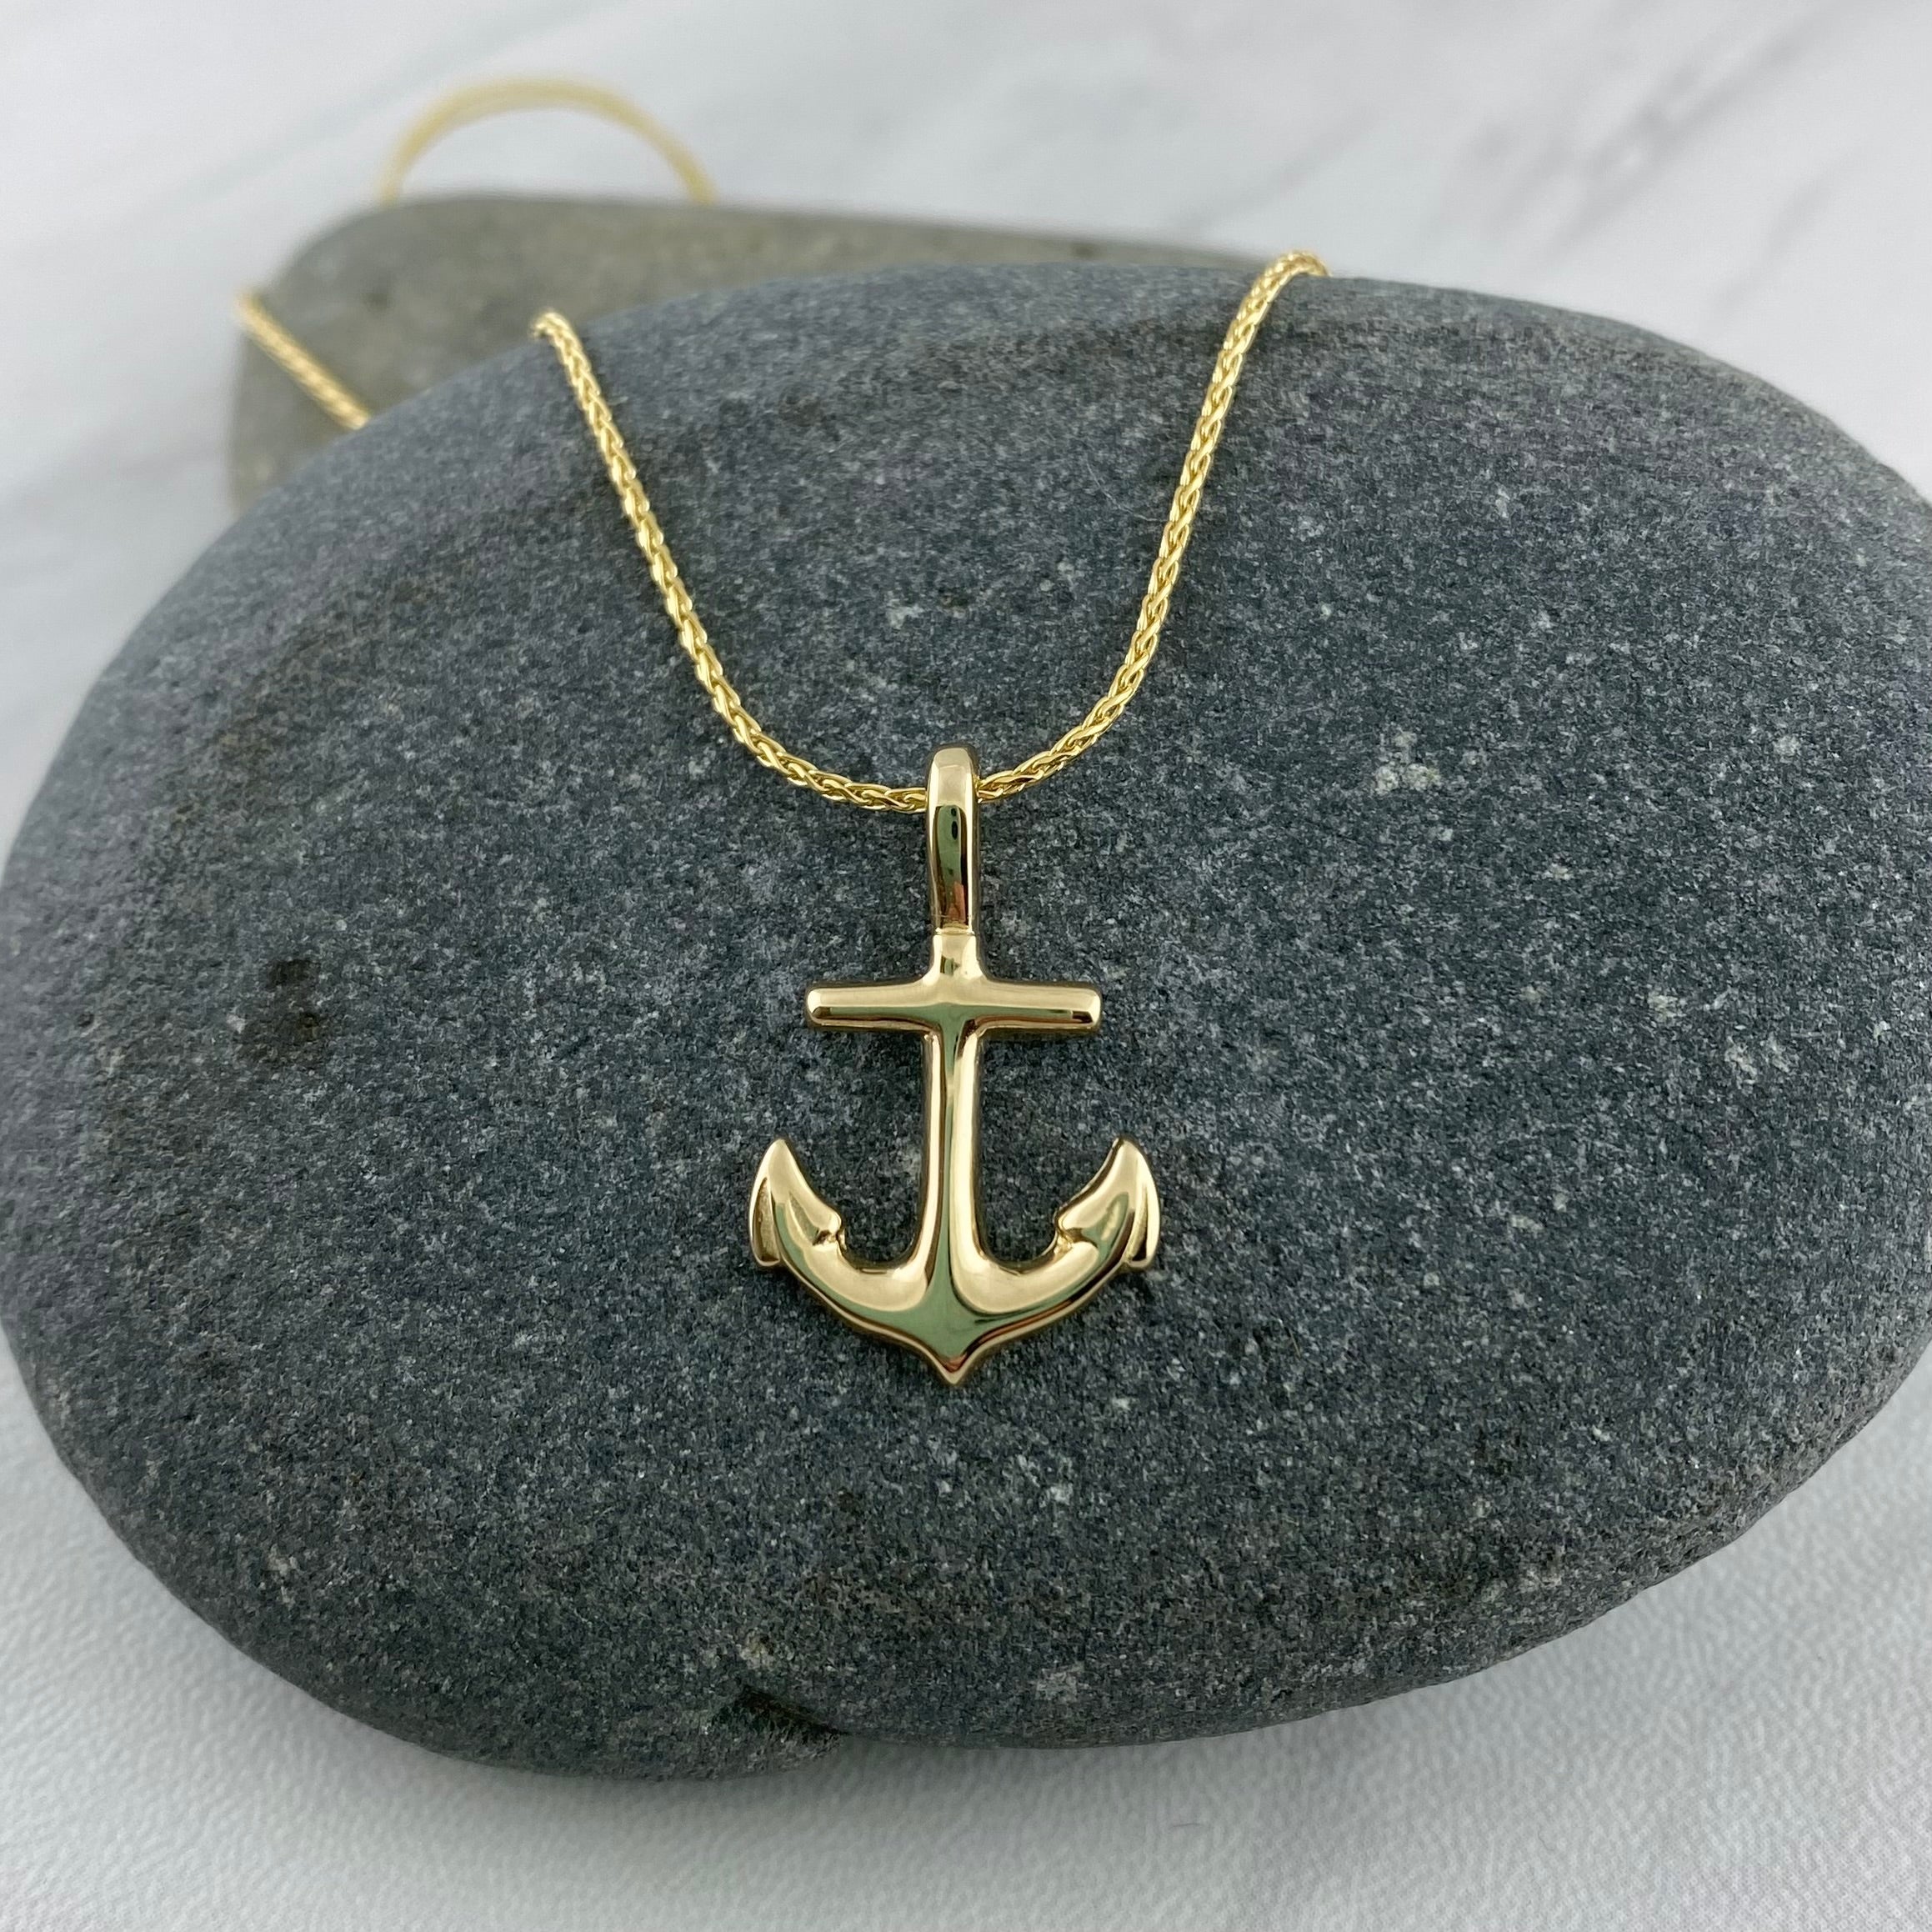 Buy 14K Gold Anchor Necklace, Tiny Gold Anchor Pendant, Anchor Choker Gold,  Ship Anchor Charm, Women's Pendant, Birthday Gift for Her Online in India -  Etsy